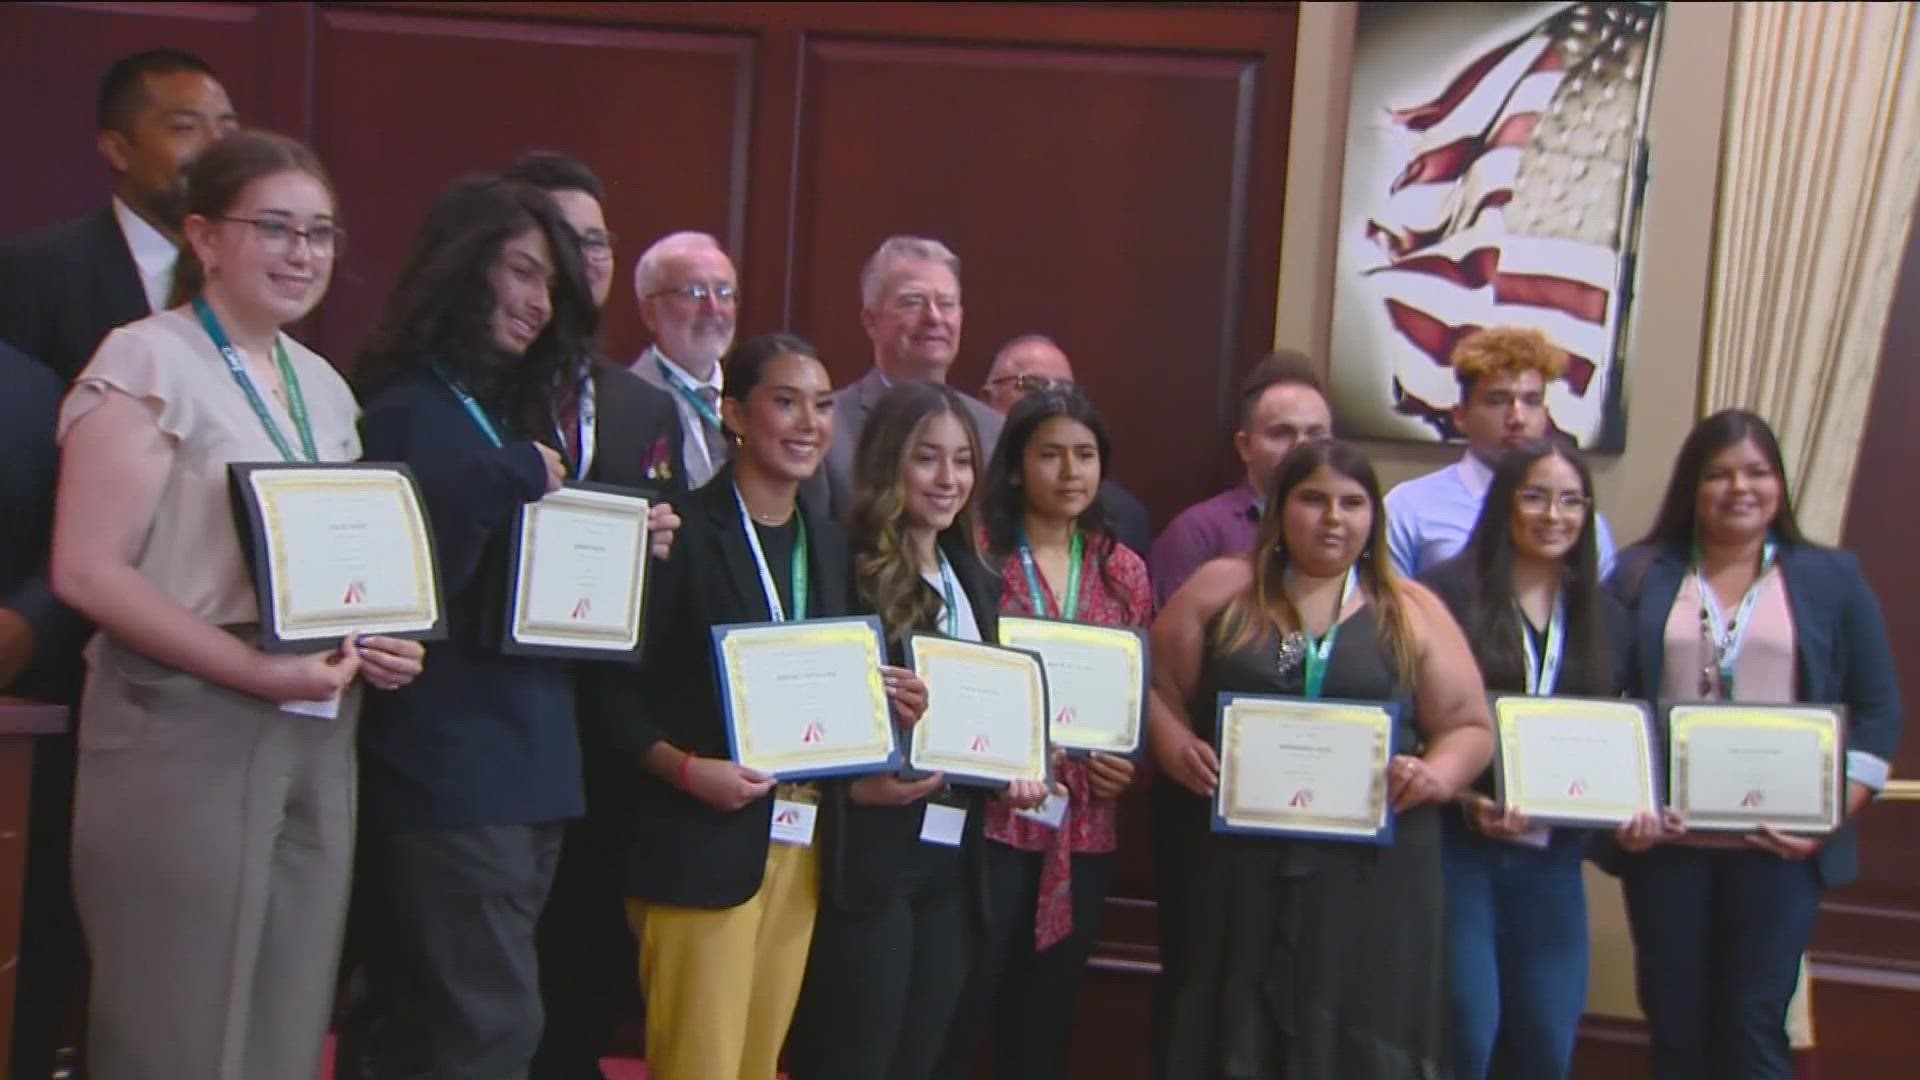 At the Hispanic Business Association's annual awards ceremony at the Idaho State Capitol, a record 21 students were congratulated for receiving scholarships.